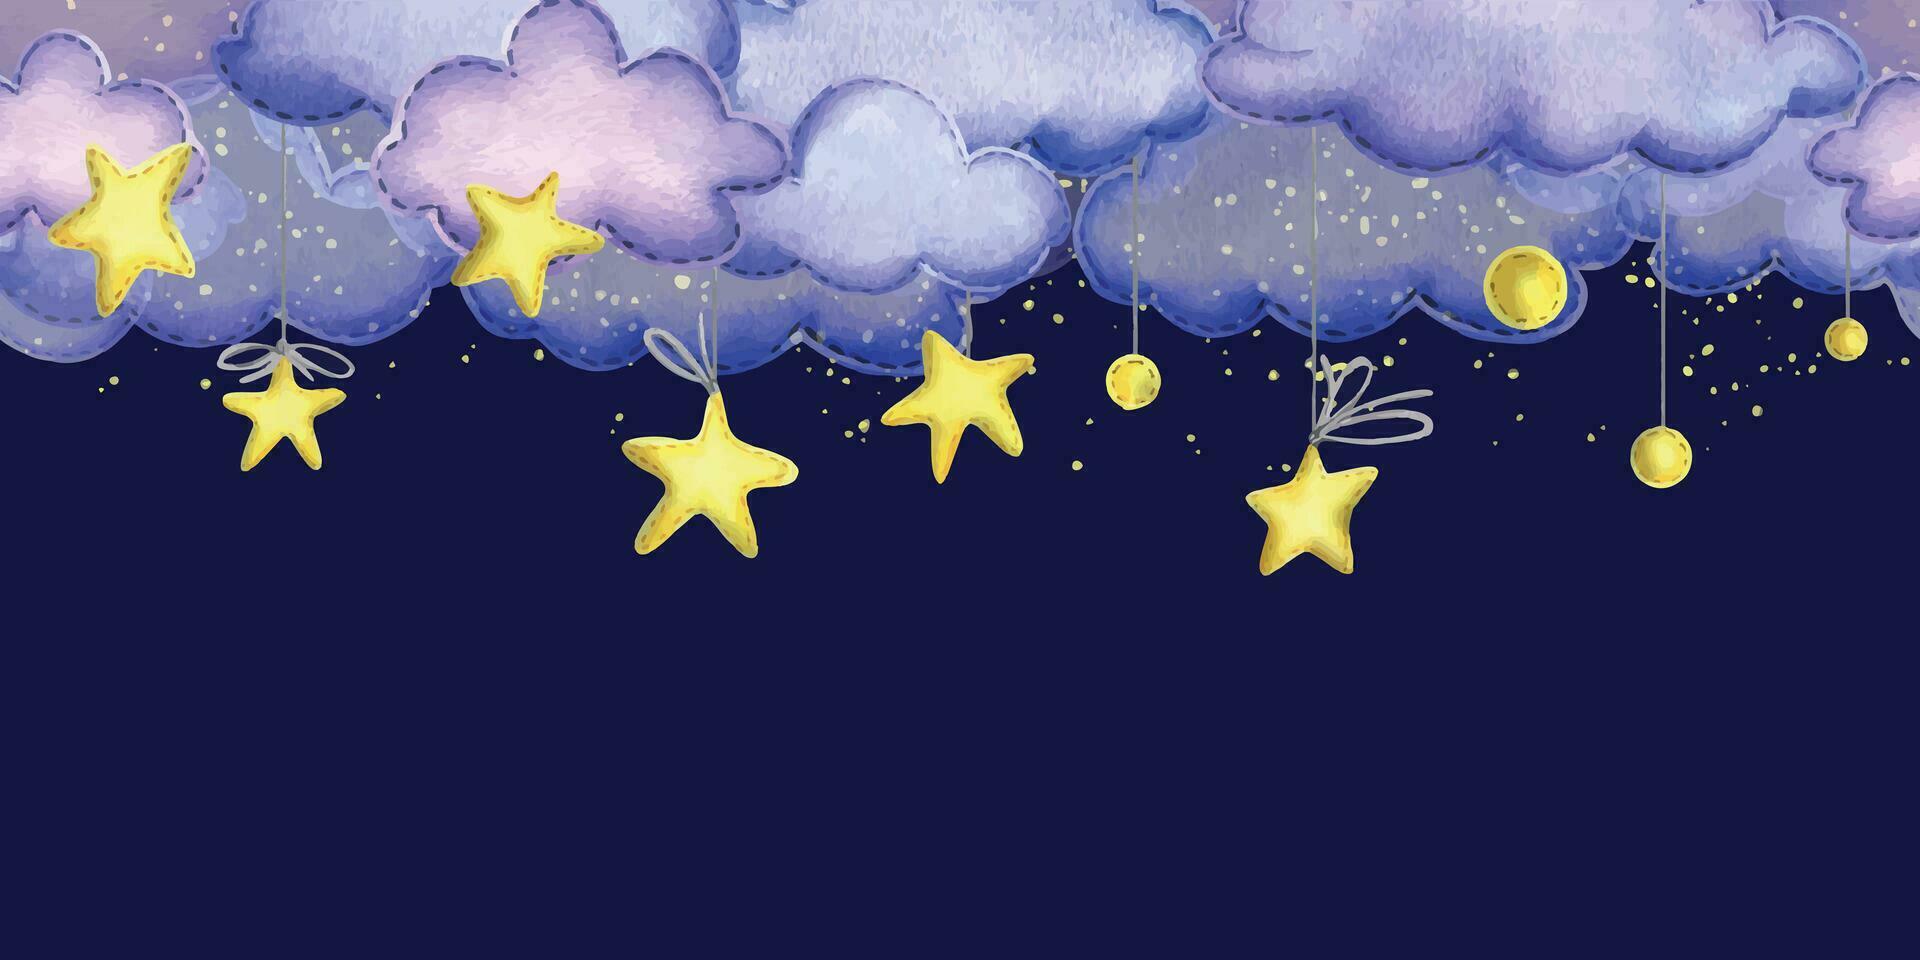 Night sky with a yellow suspended stars and clouds sewn from fabric with thread stitches. Children s hand drawn watercolor illustration. Seamless banner, template on a dark blue background. vector